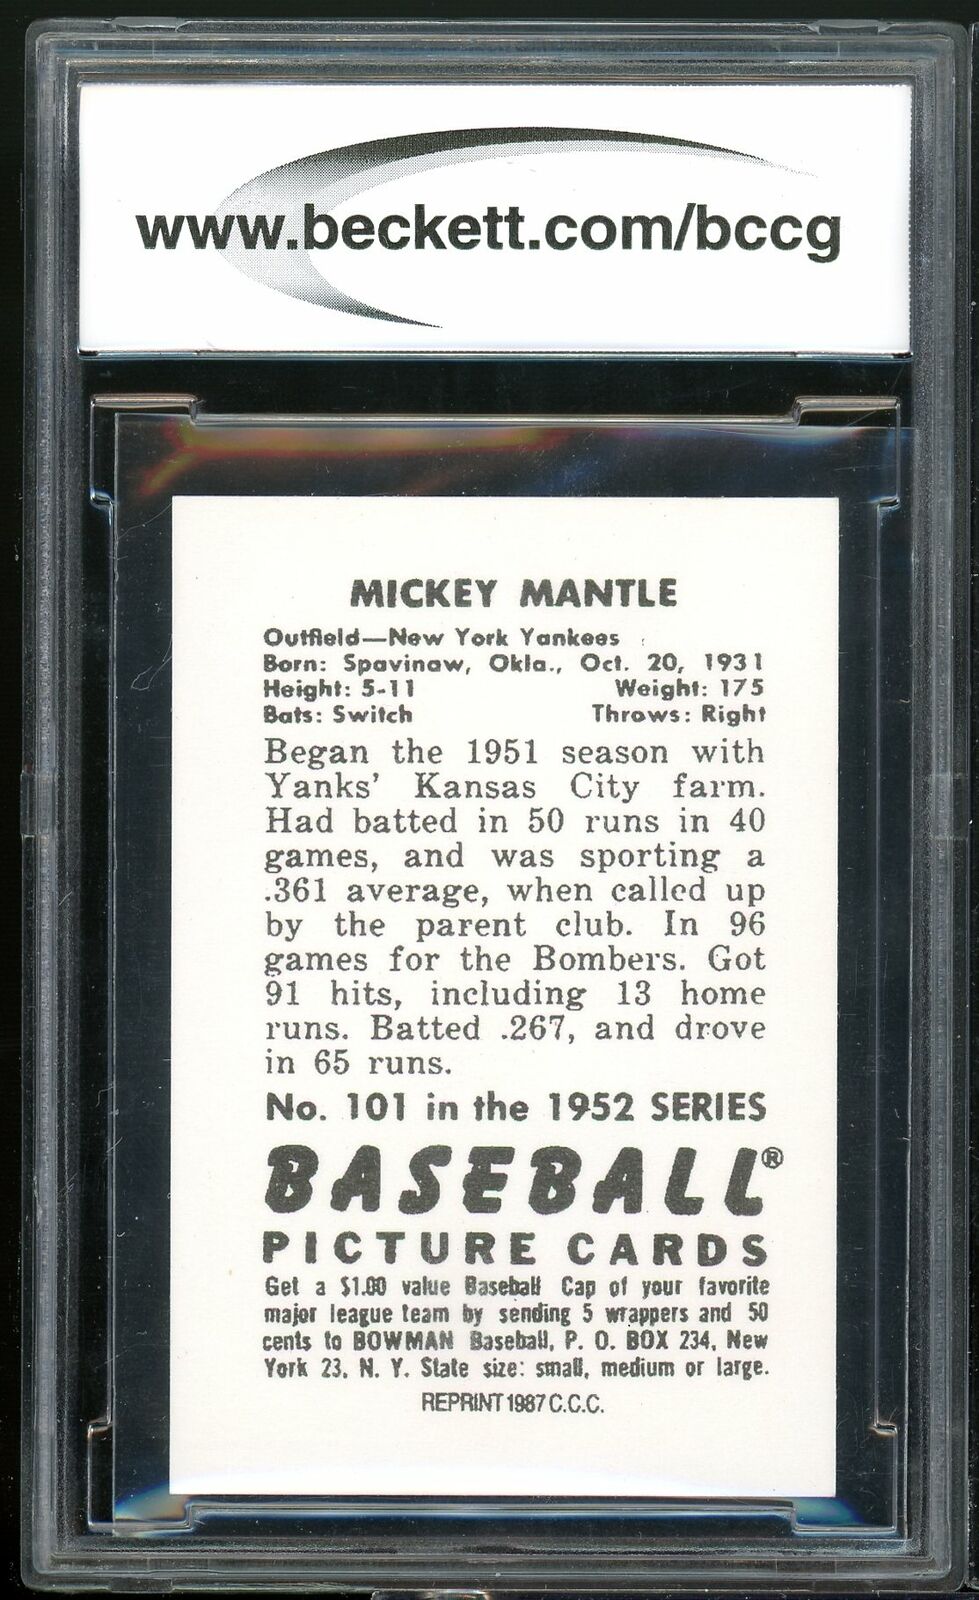 1989 Bowman Reprint Inserts #6 Mickey Mantle '53 Card BGS BCCG 10 Mint+ Image 2